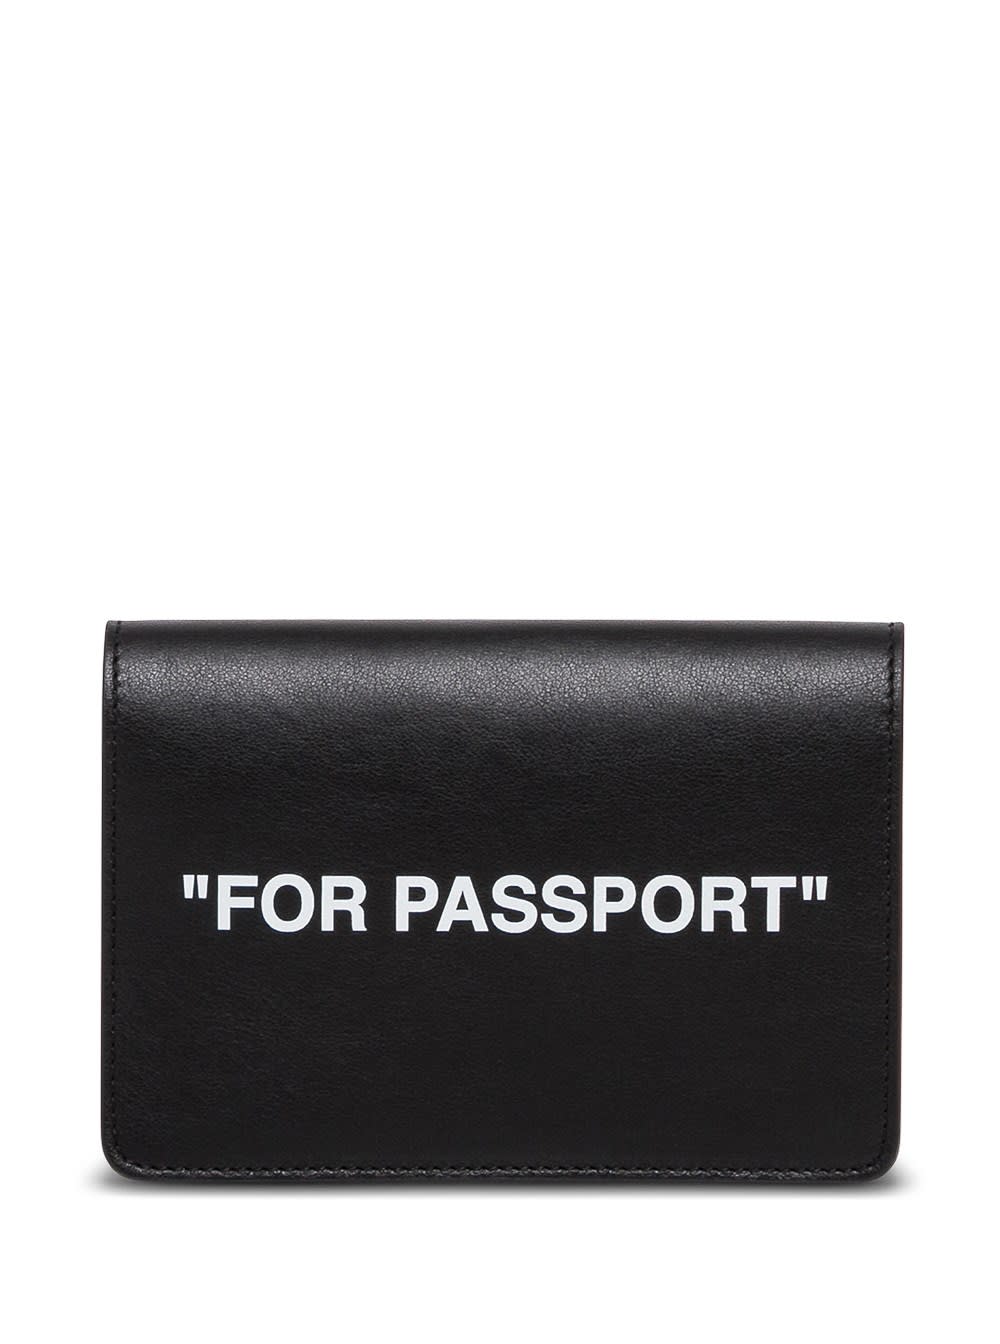 OFF-WHITE BLACK LEATHER CARD HOLDER WITH PRINT,OMNC010S21LEA0011001